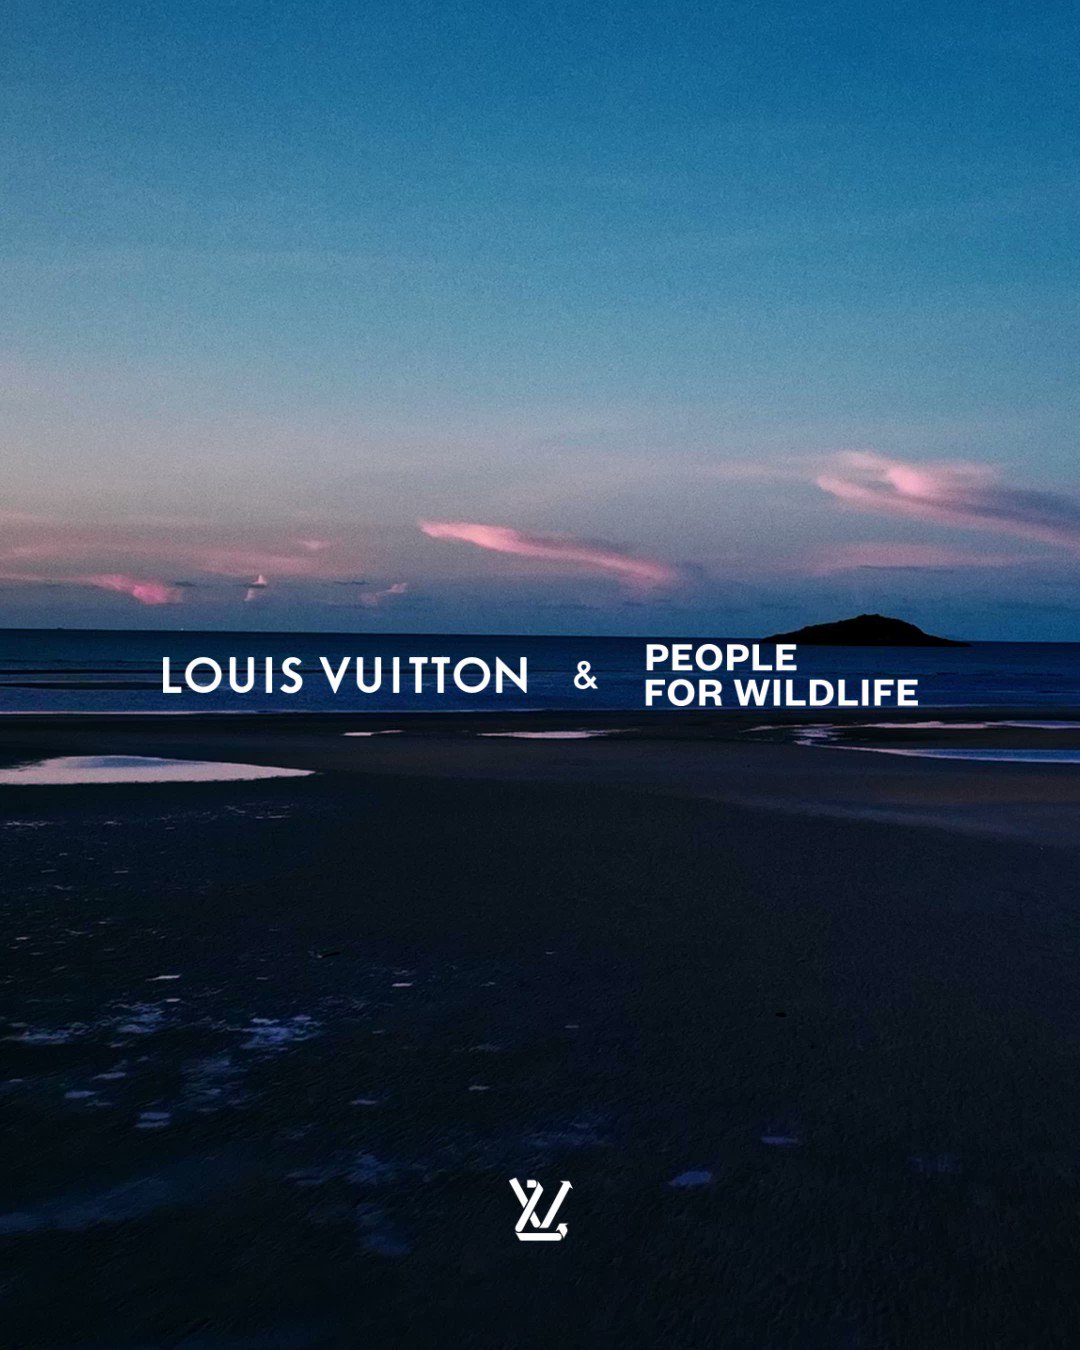 Louis Vuitton on X: Immense biodiversity. With this partnership